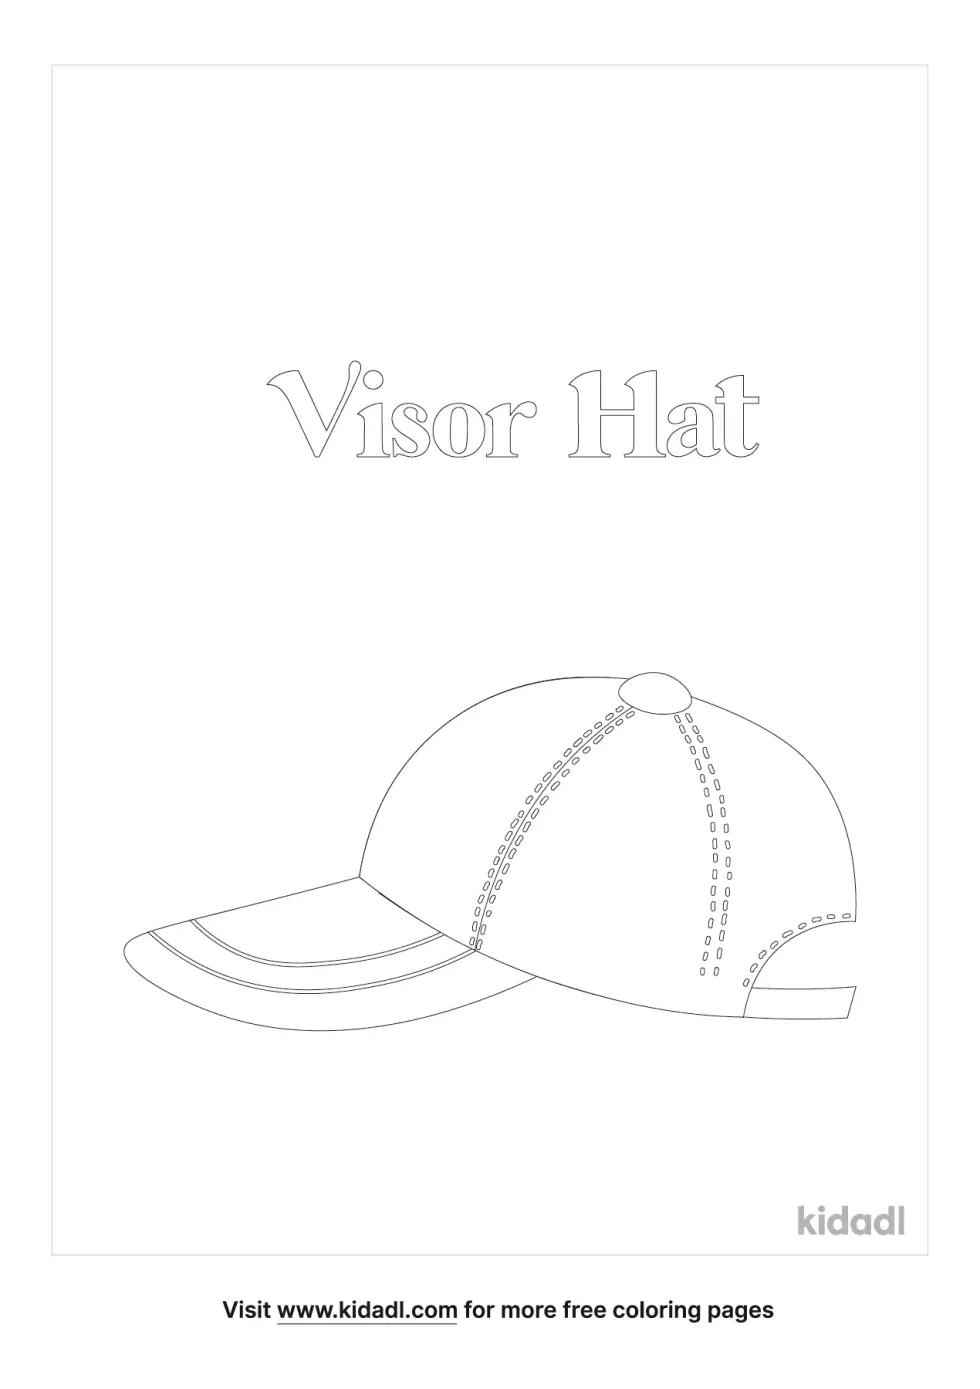 Visor Hat Coloring Page